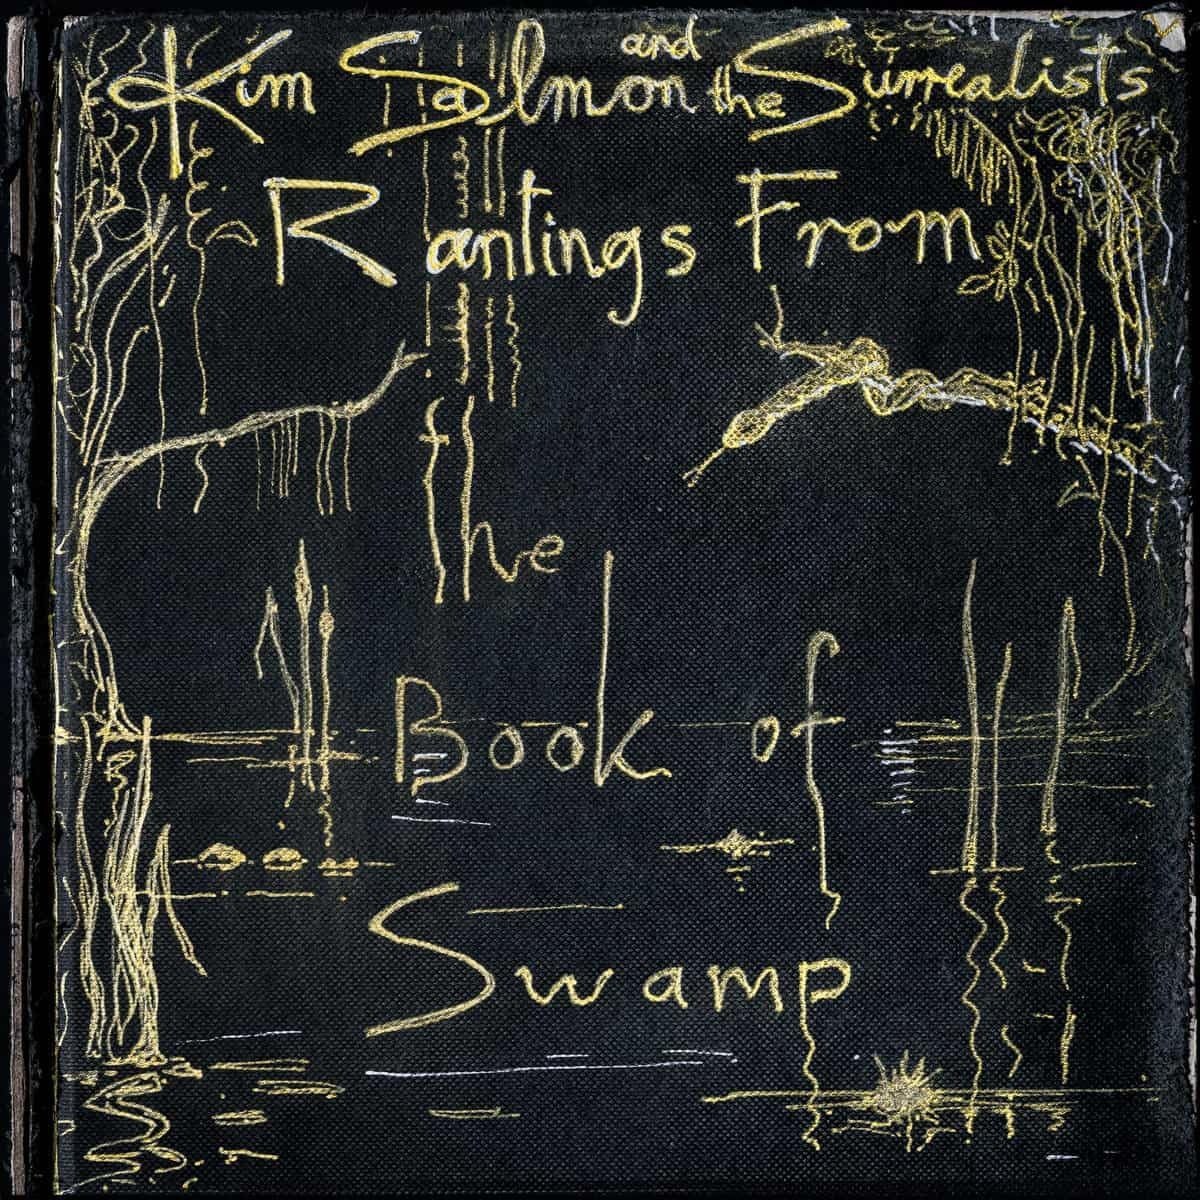 CD Shop - SALMON, KIM & THE SURREAL RANTINGS FROM THE BOOK OF SWAMP